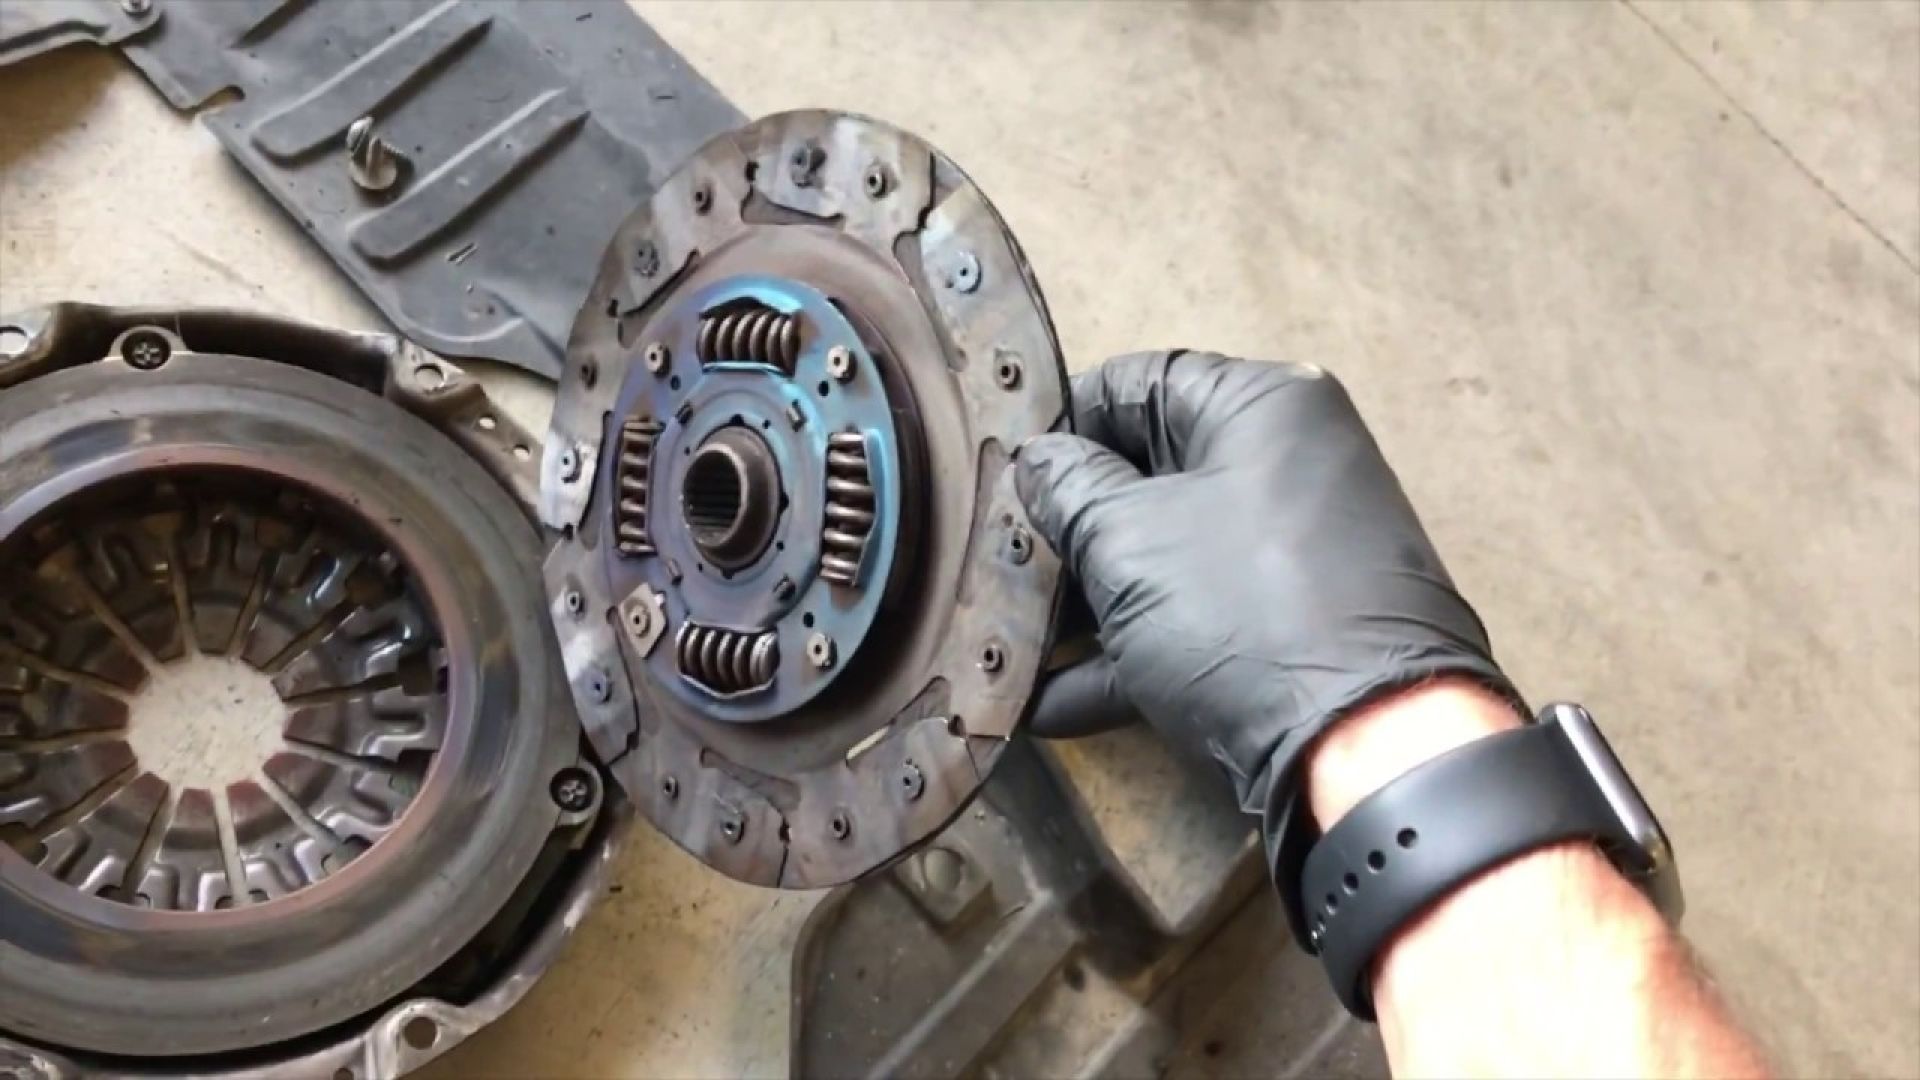 Get a clutch repair from the mechanics at Southbrook Autos in Rangiora